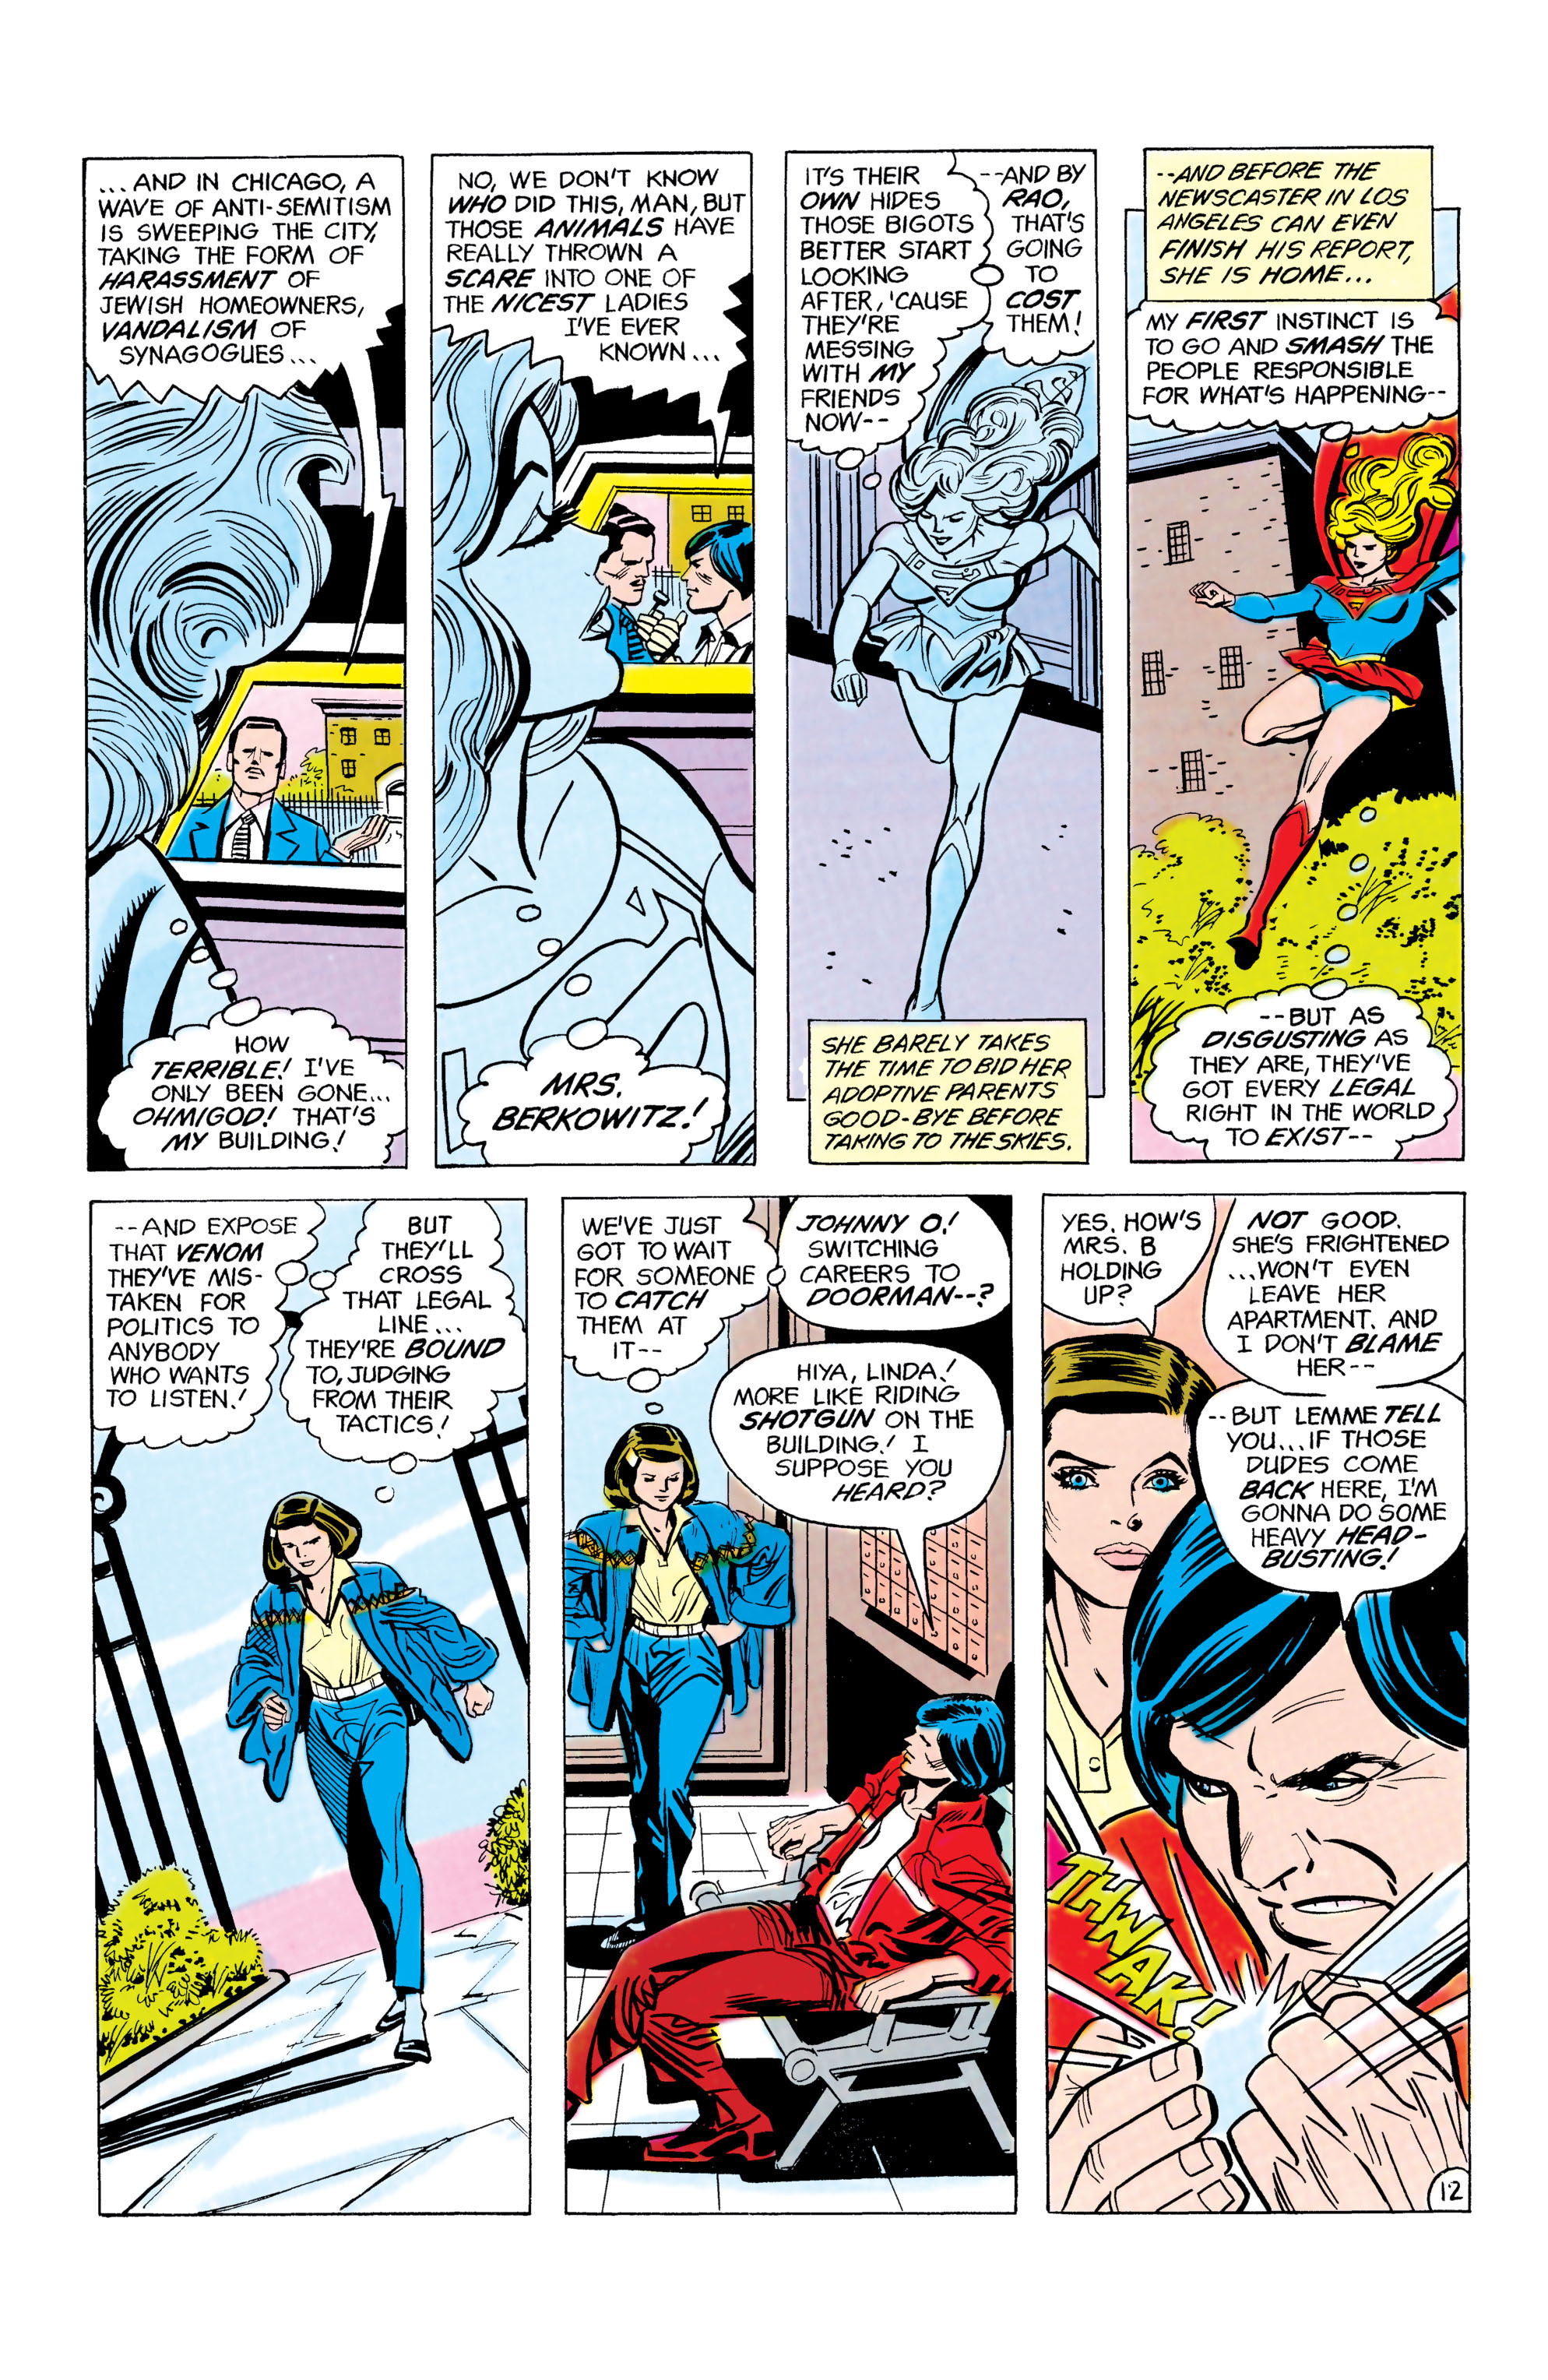 Supergirl (1982) 13 Page 12